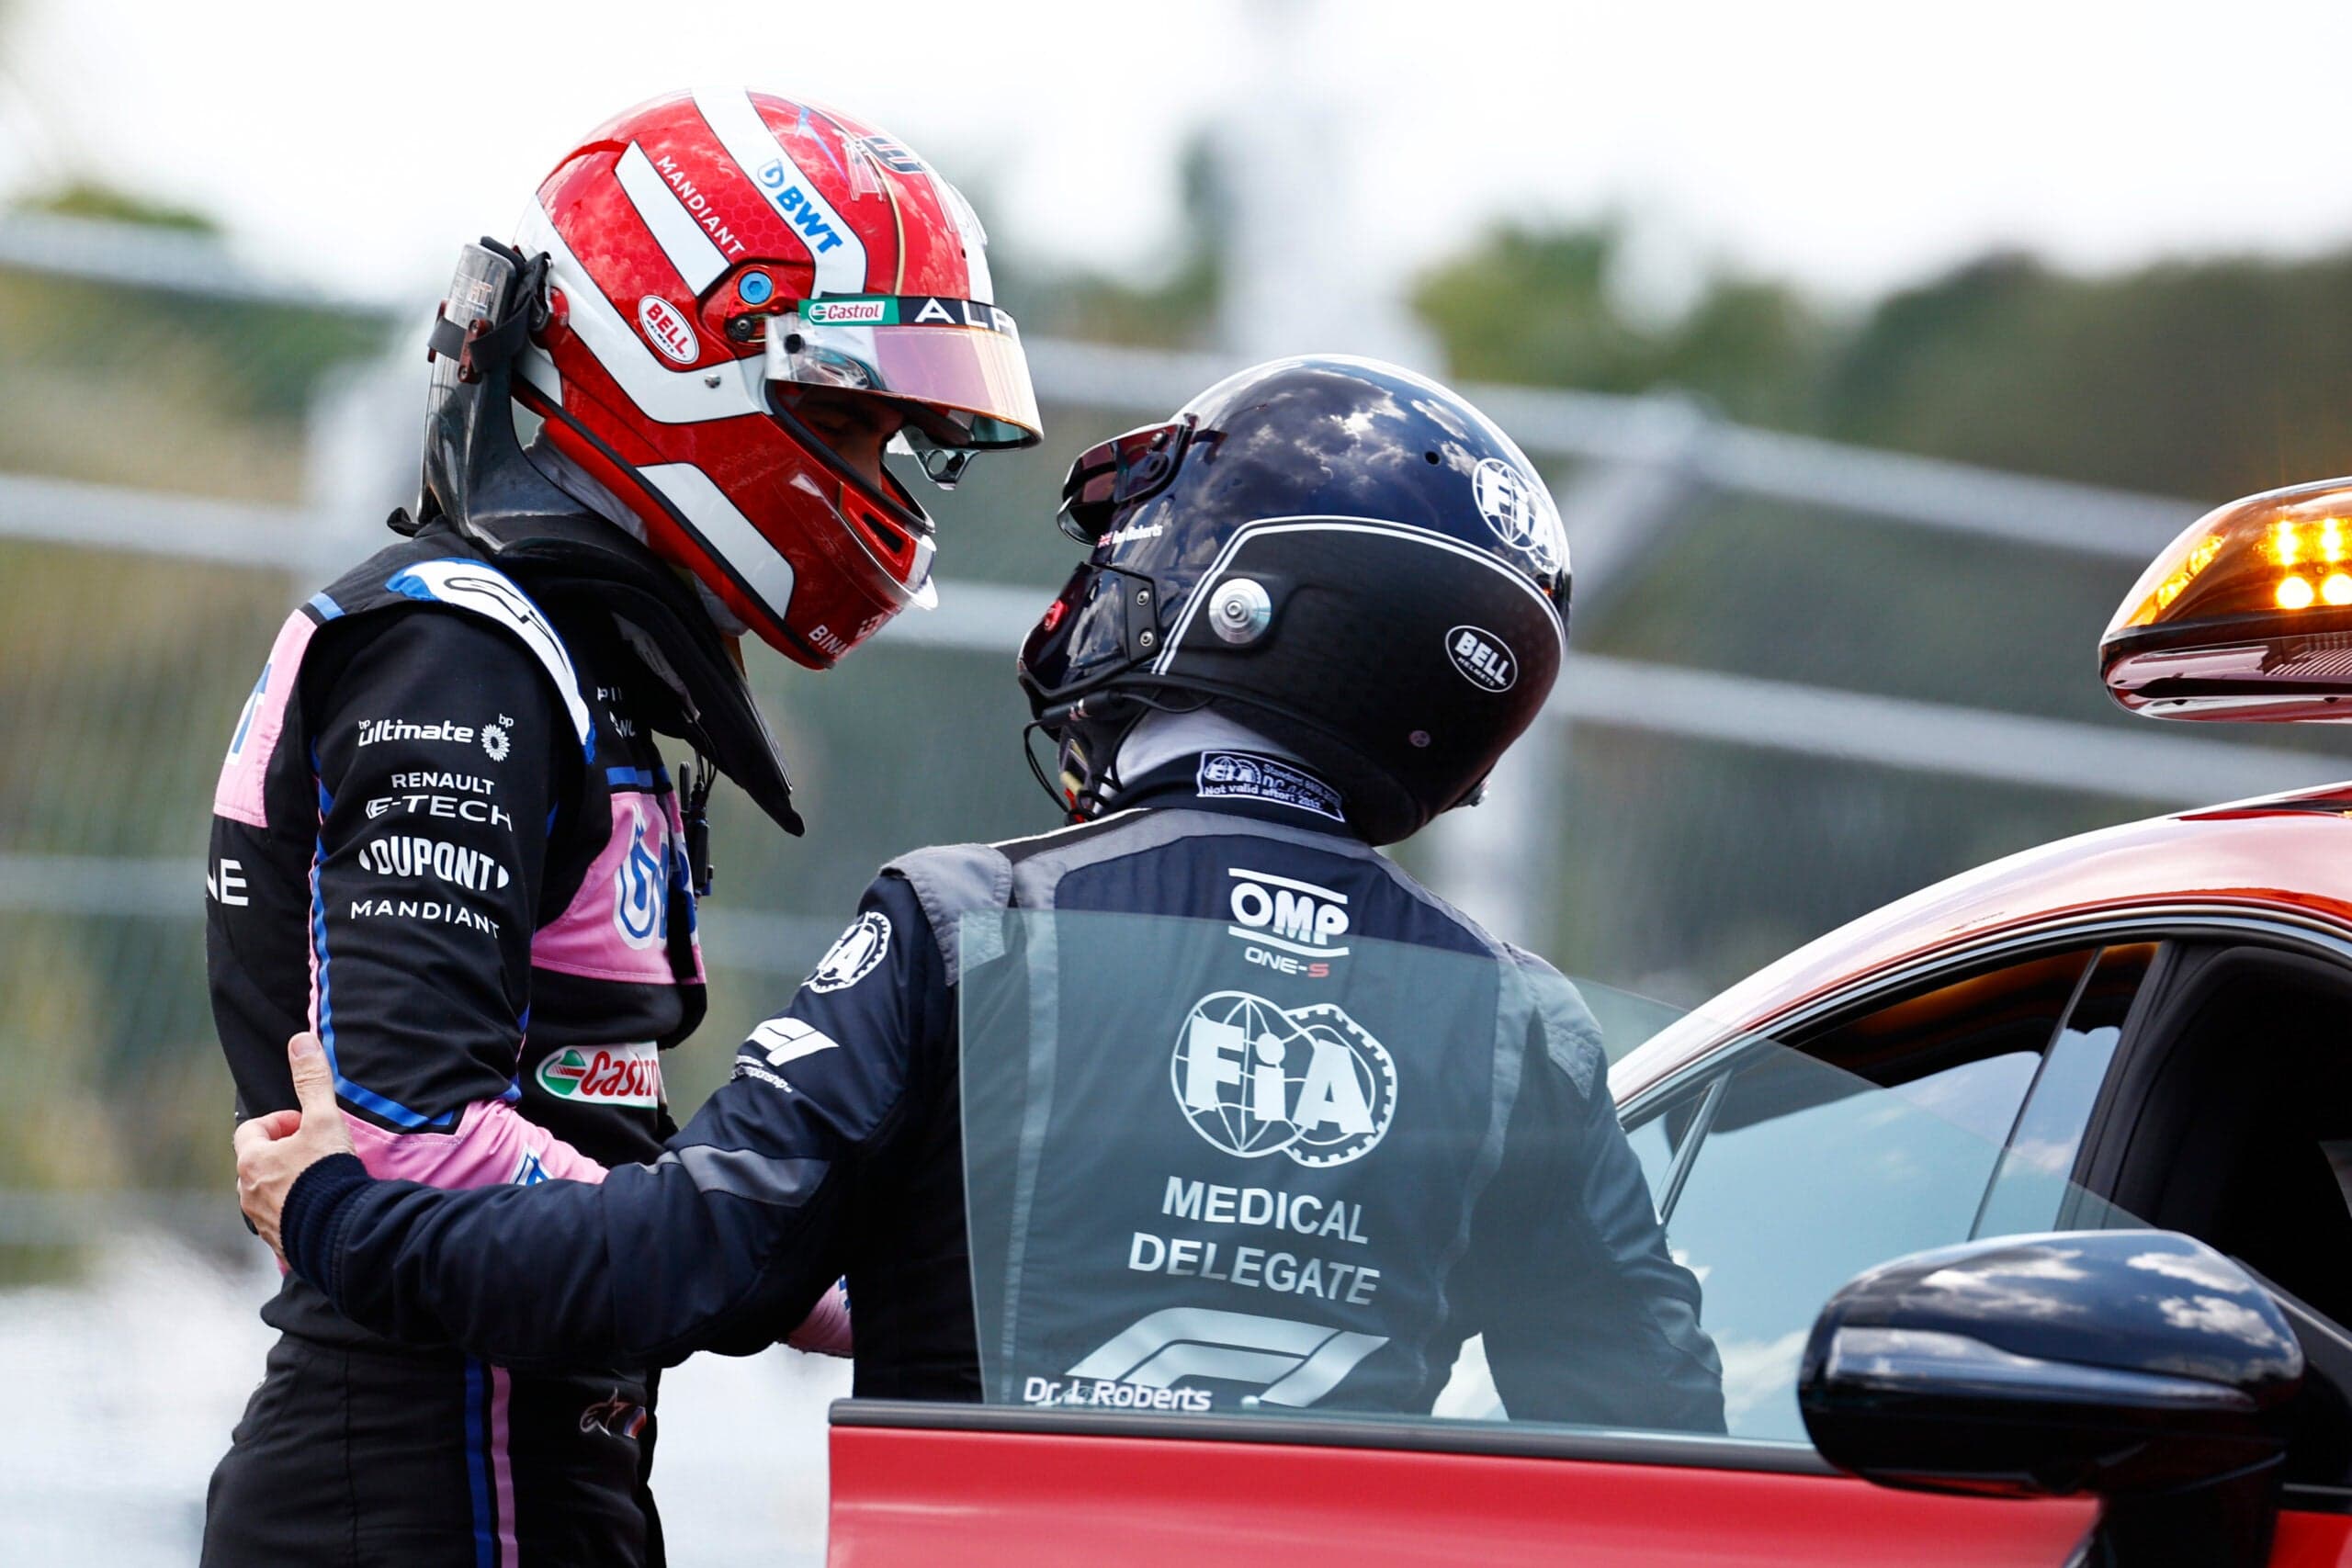 Esteban Ocon being helped into the F1 medical car by medical personnel